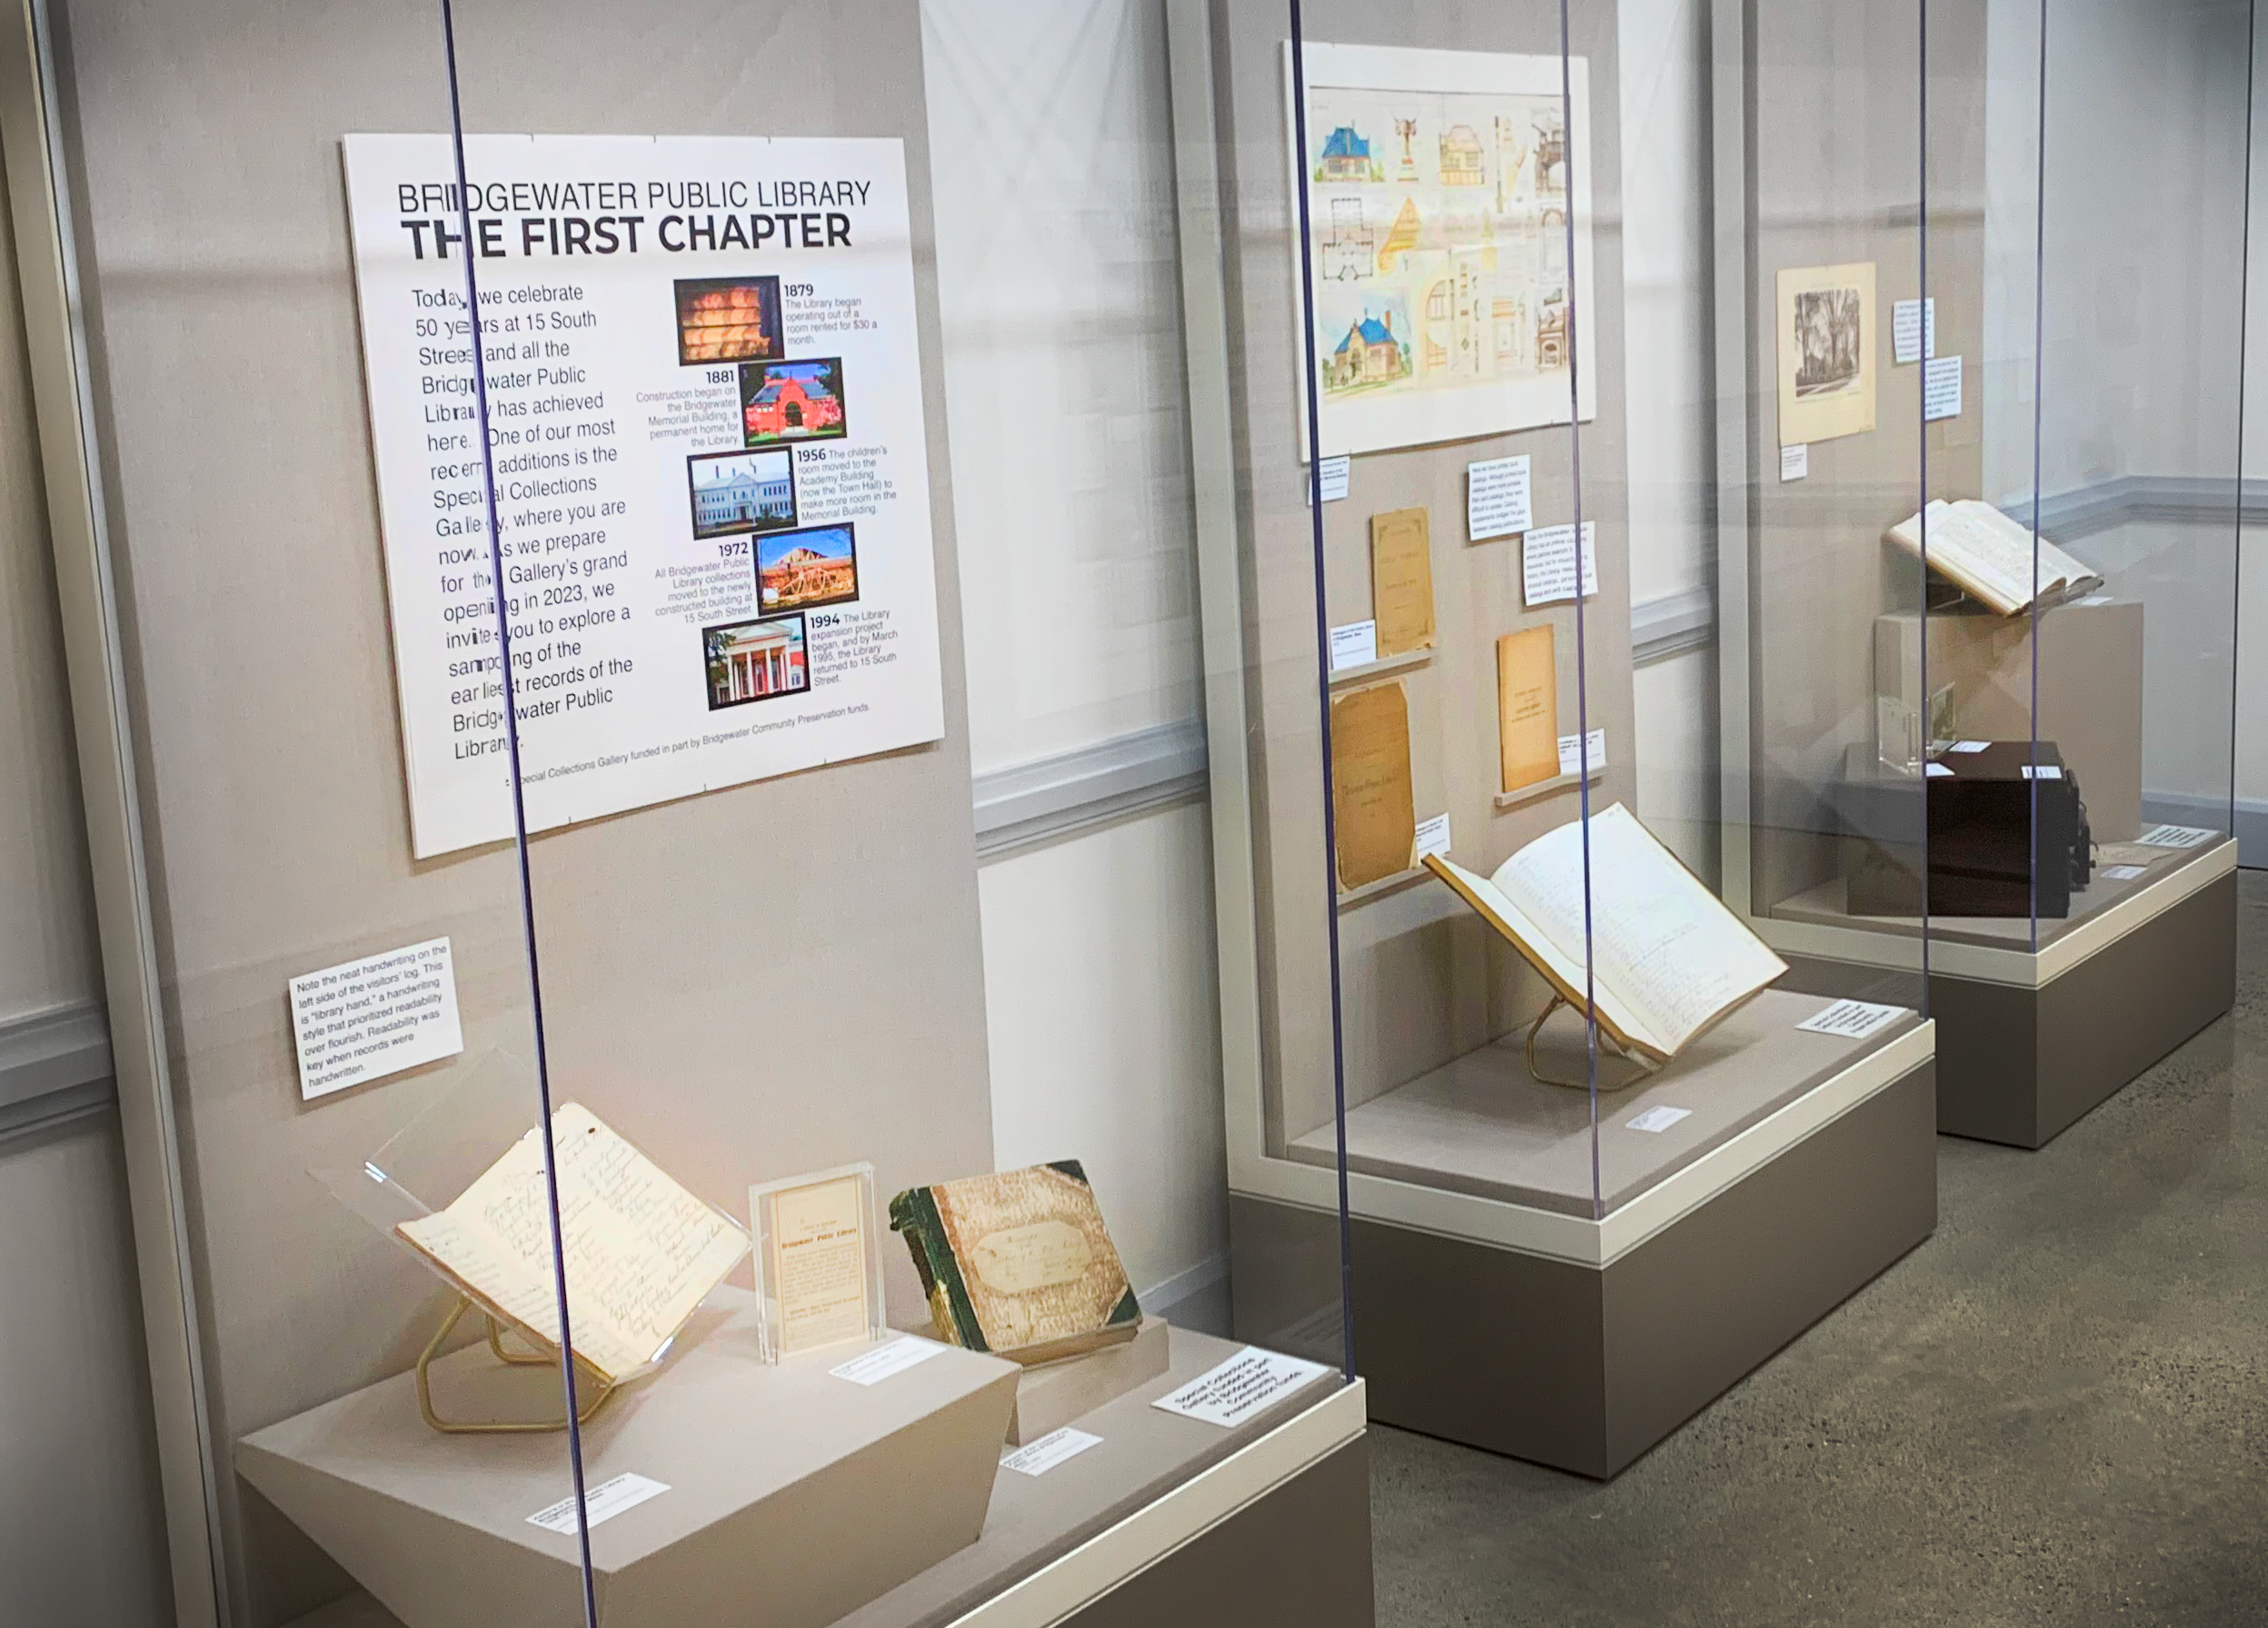 Photograph of Bridgewater Public Library: The First Chapter exhibit